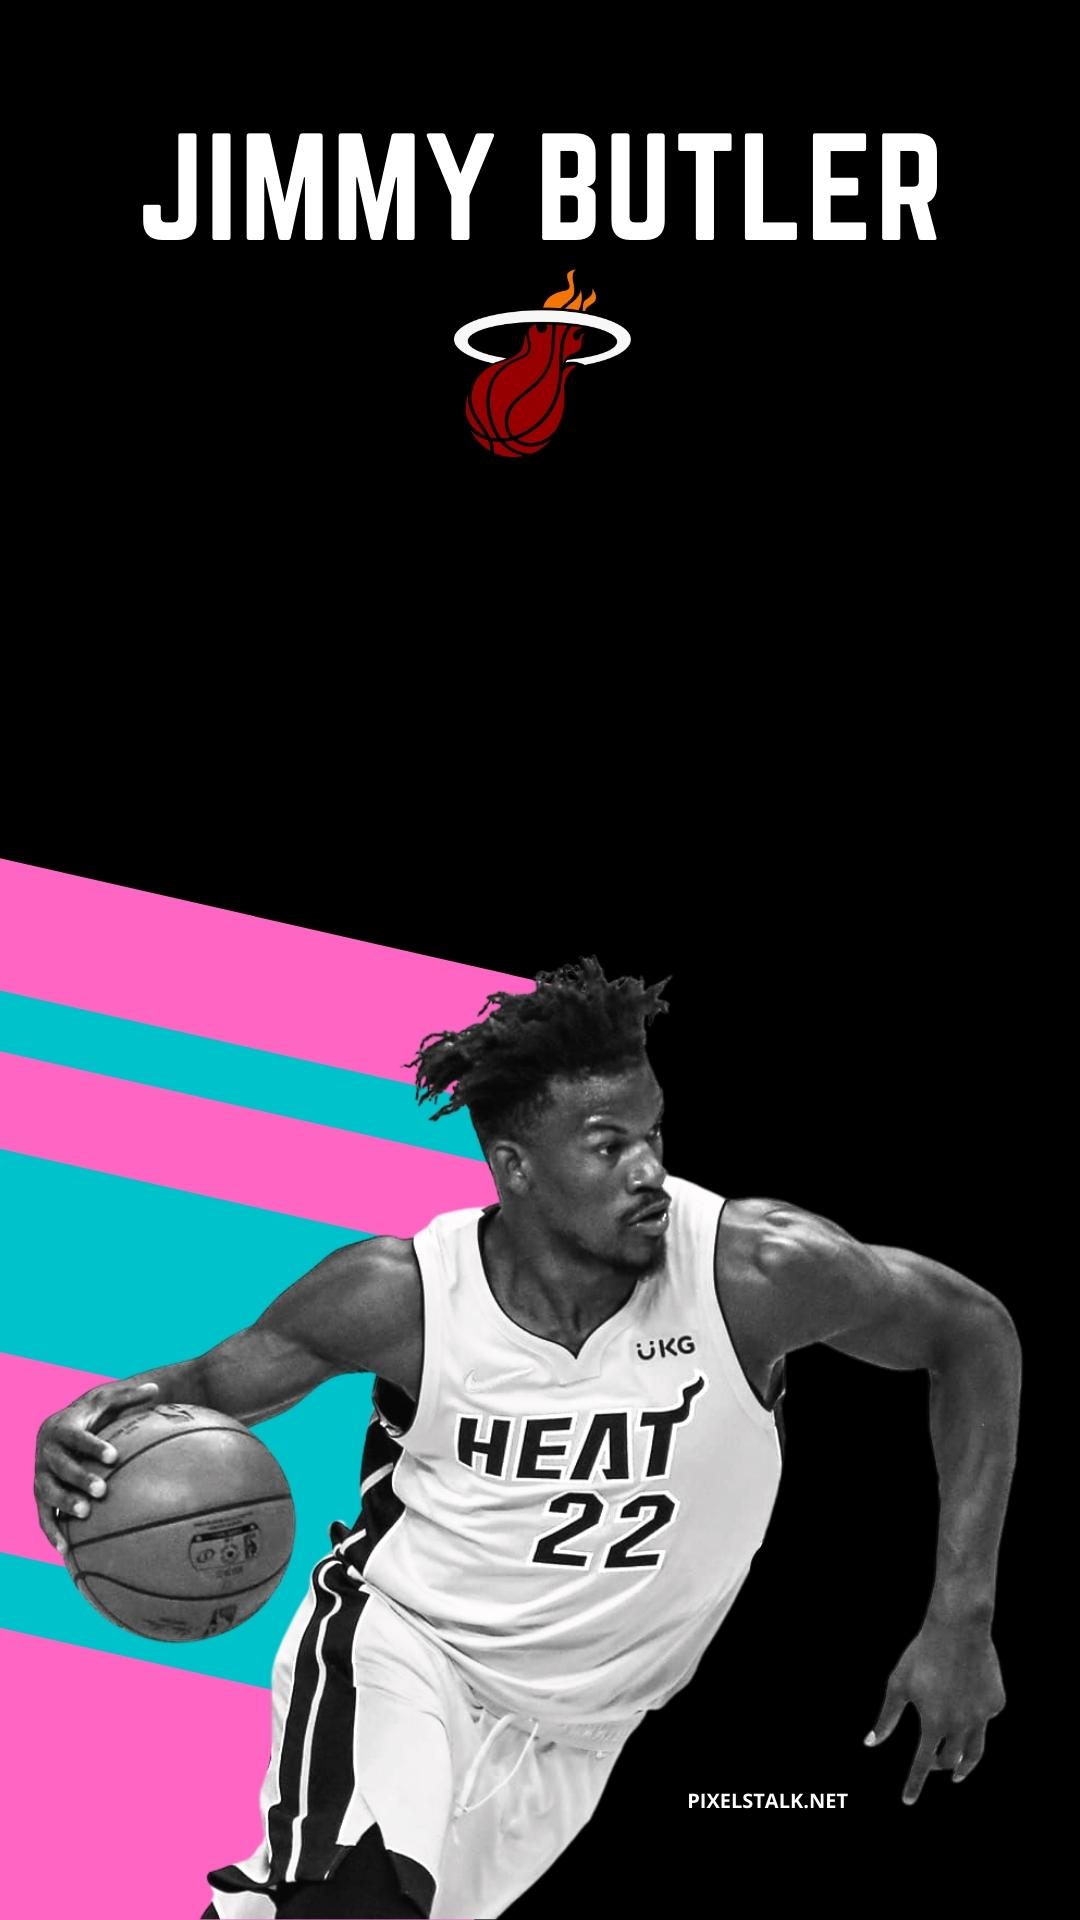 JIMMY BUTLER GOES PLAYOFFMODE WITH PLAYOFF CAREERHIGH 56 PTS   miamiheat take GAME 4 of the NBAPlayoffs presented by Google Pixel  NBA  nba on Instagram